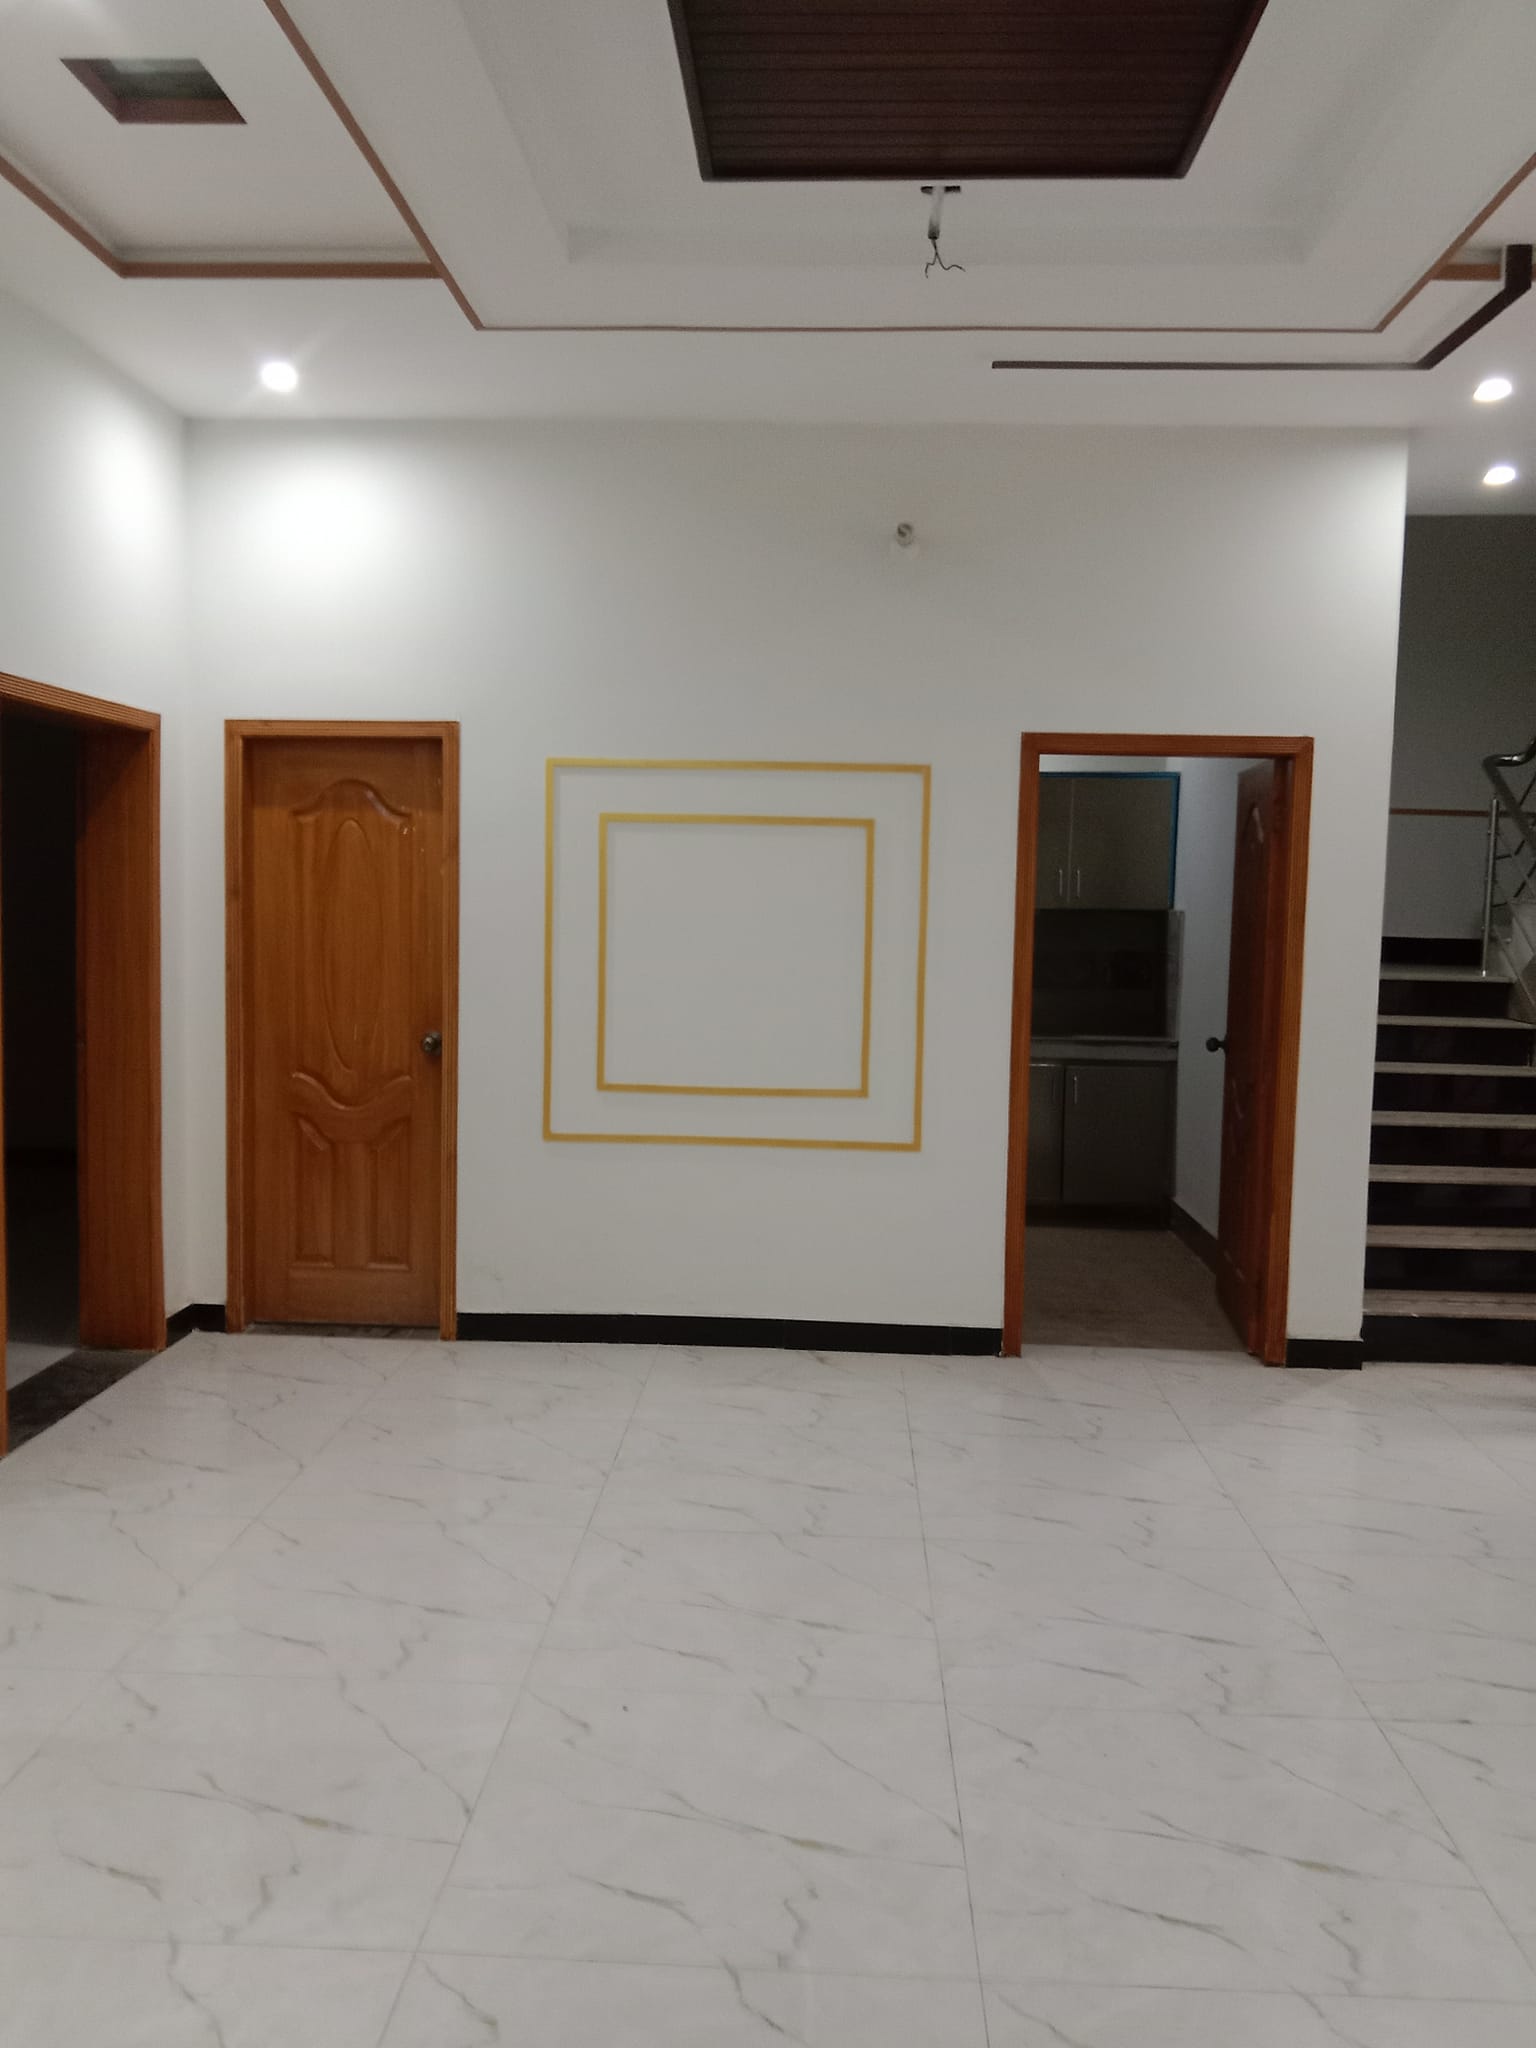 7 Marla Beautiful House For Sale in Model Town T Chowk  Mid Land Colony Multan